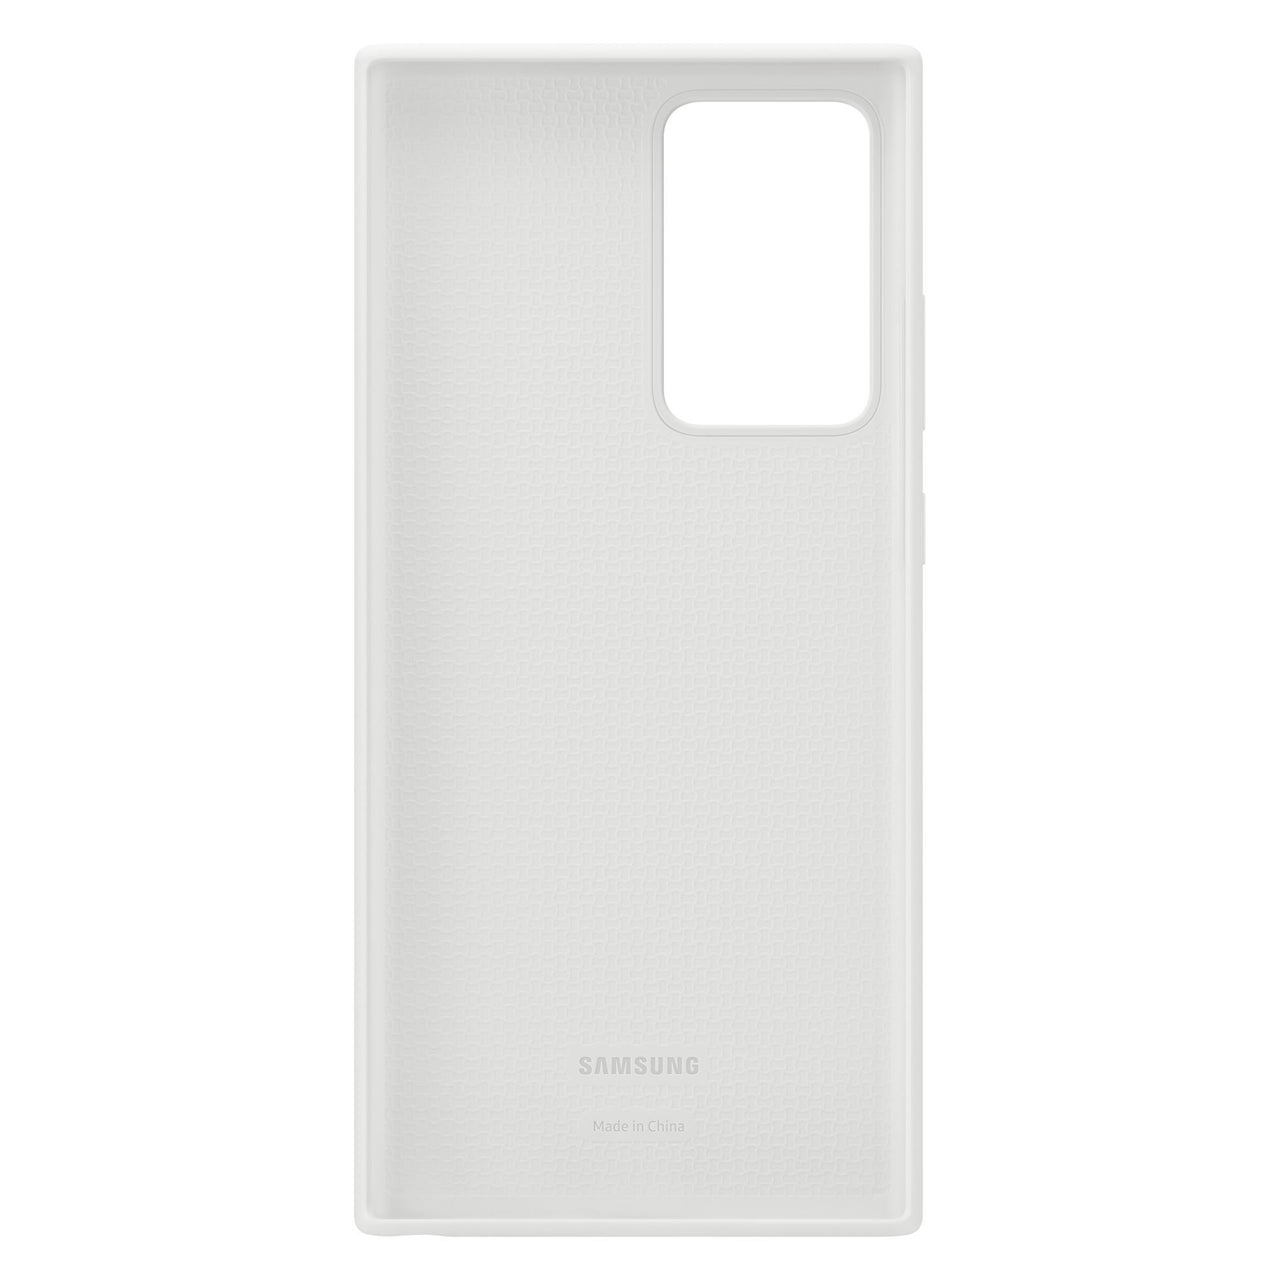 Samsung Silicone Cover for Galaxy Note20 Ultra - White